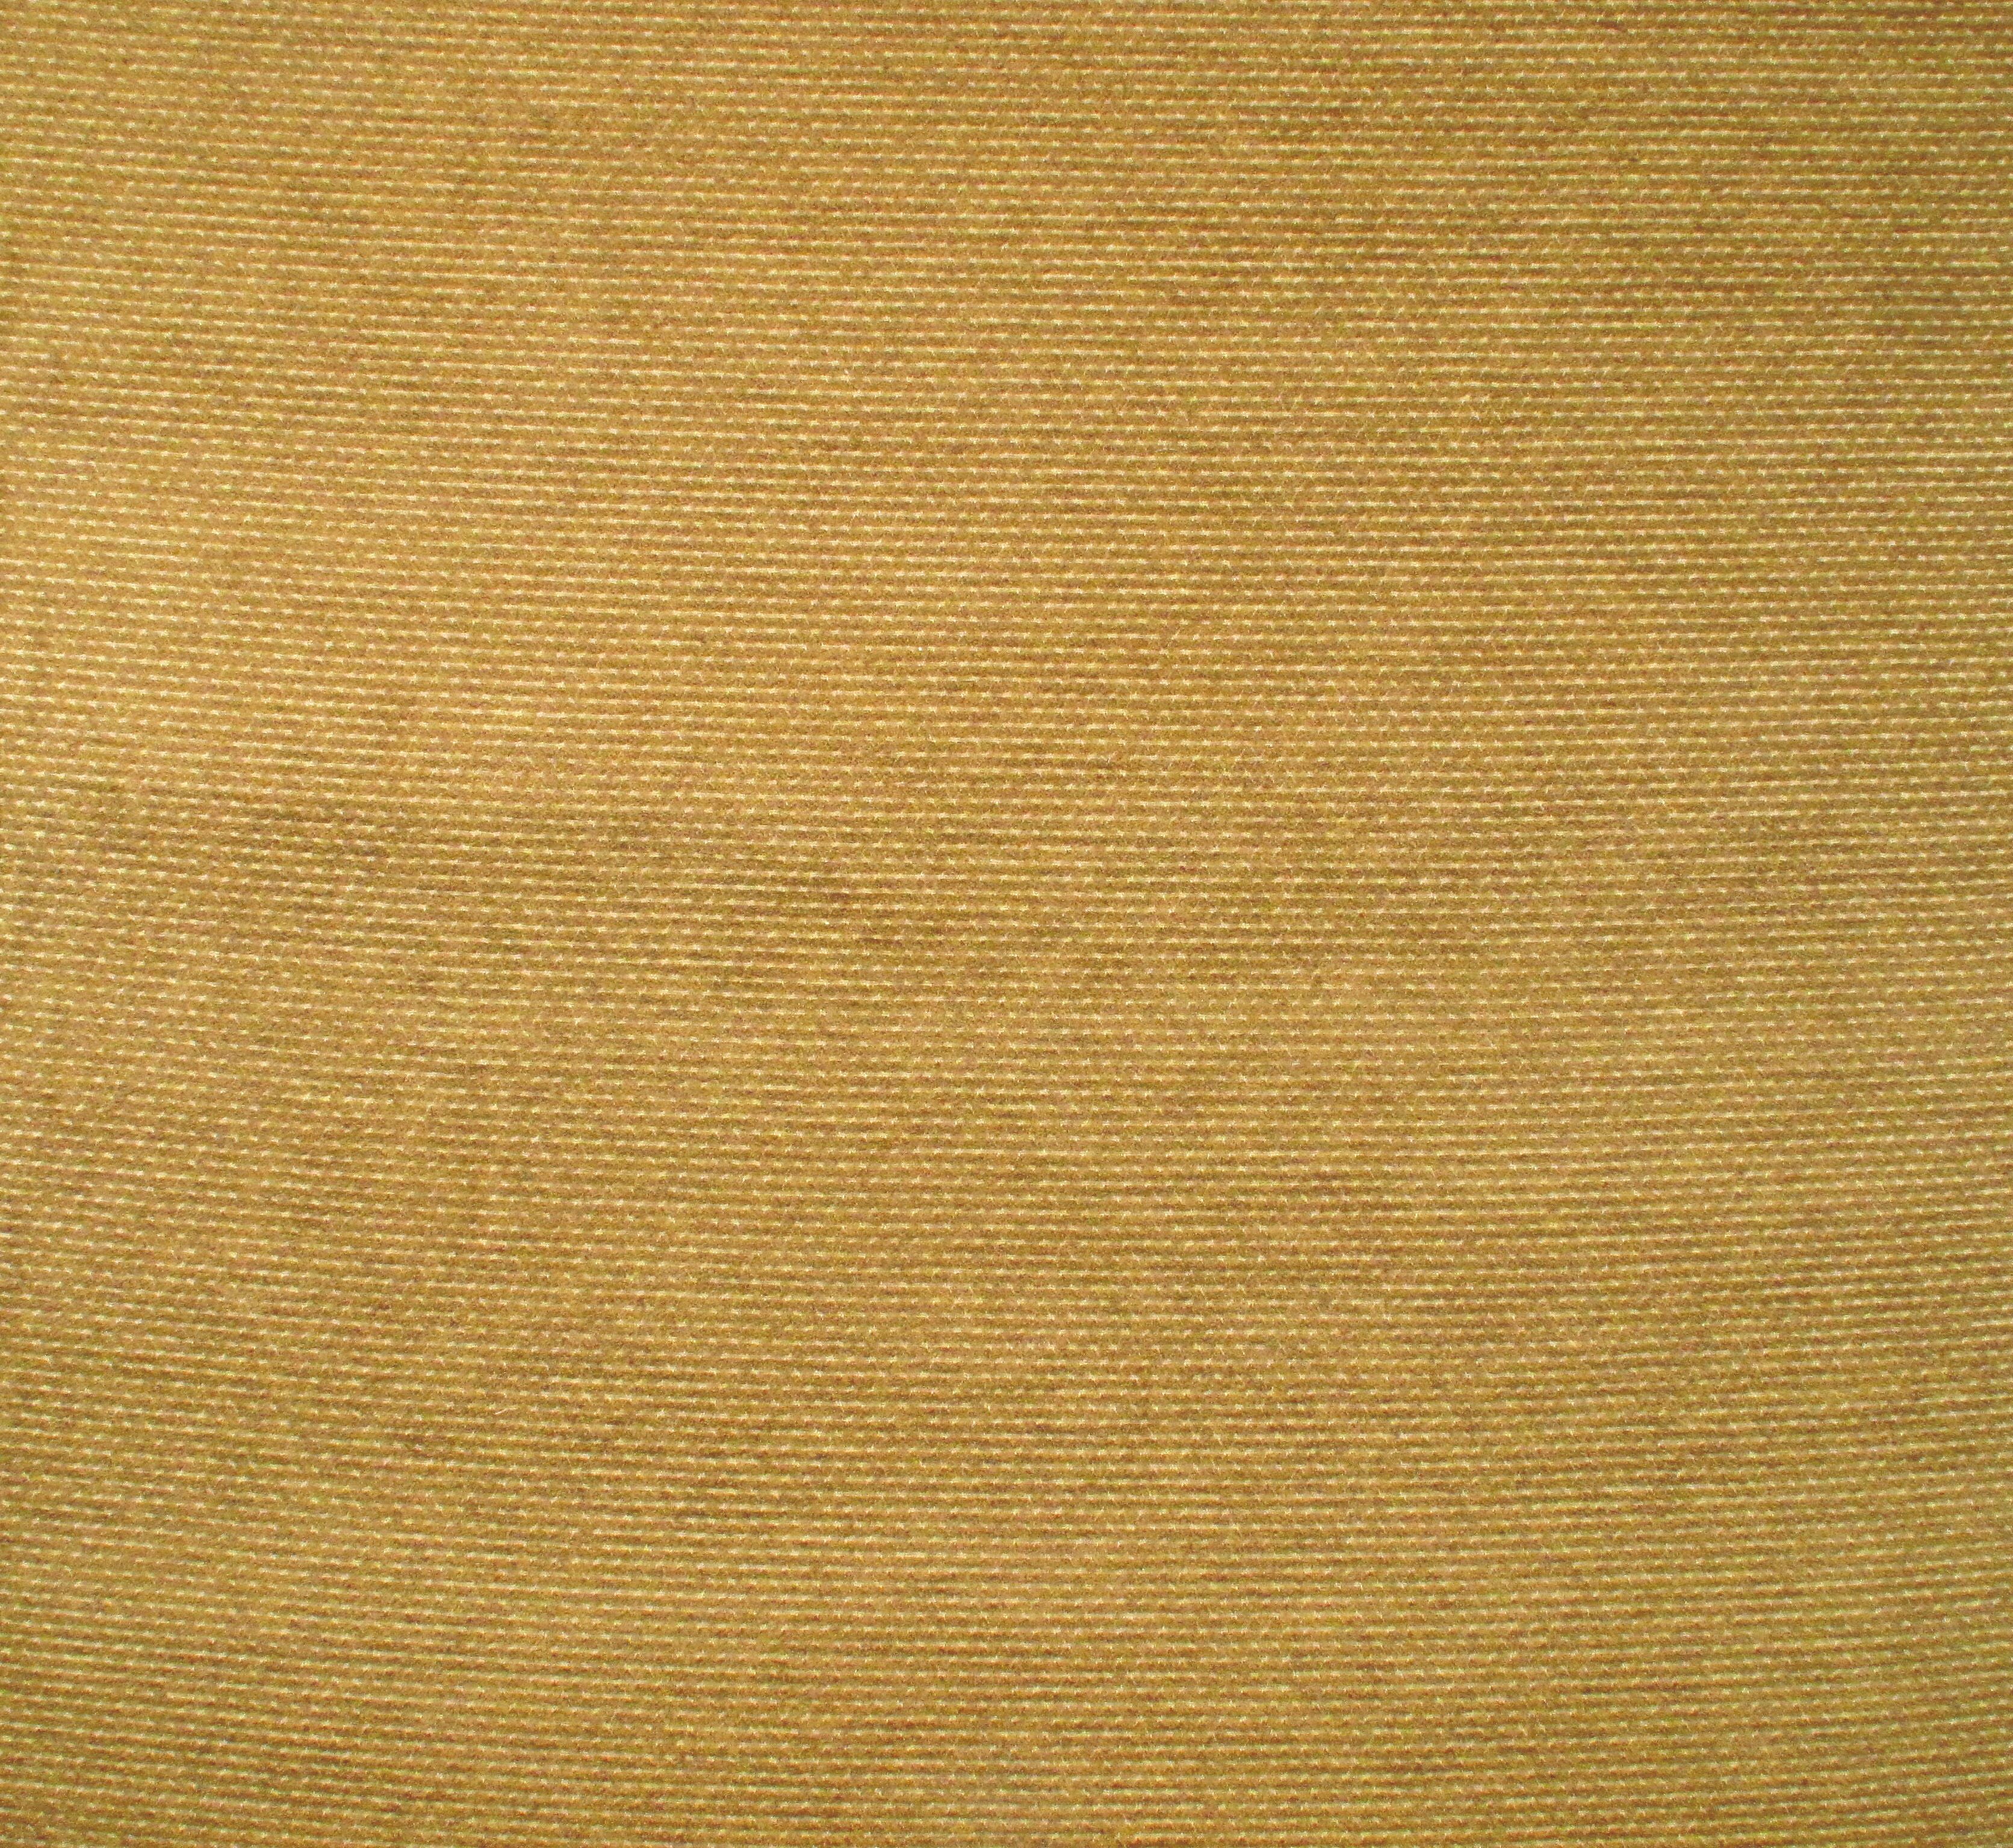 Yosemite fabric in honey color - pattern number PW 00031460 - by Scalamandre in the Old World Weavers collection